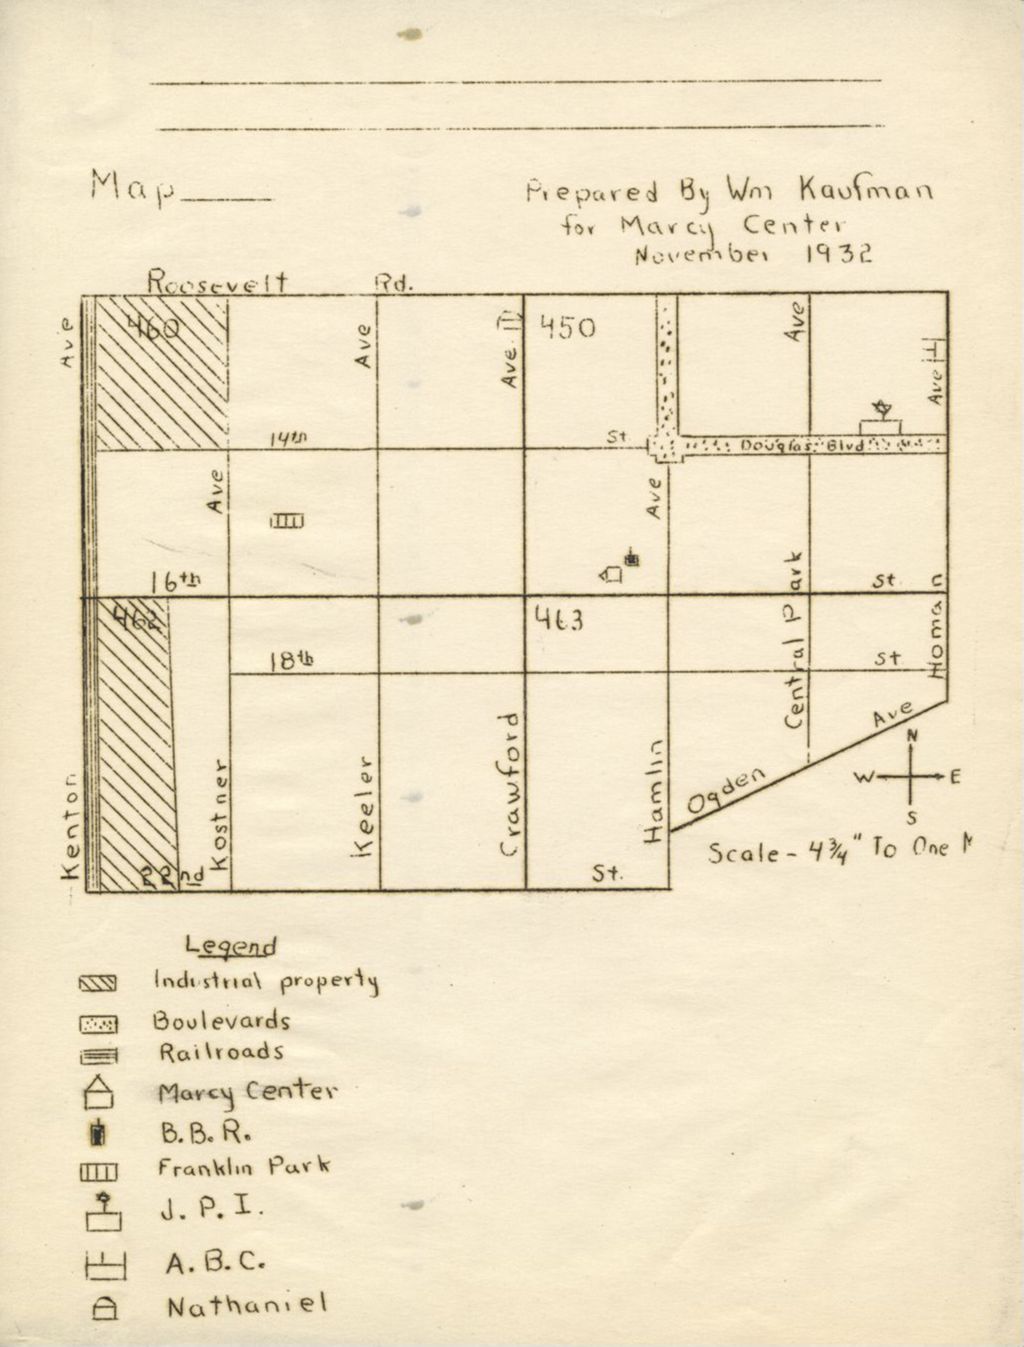 Miniature of North Lawndale map showing location of Marcy Center